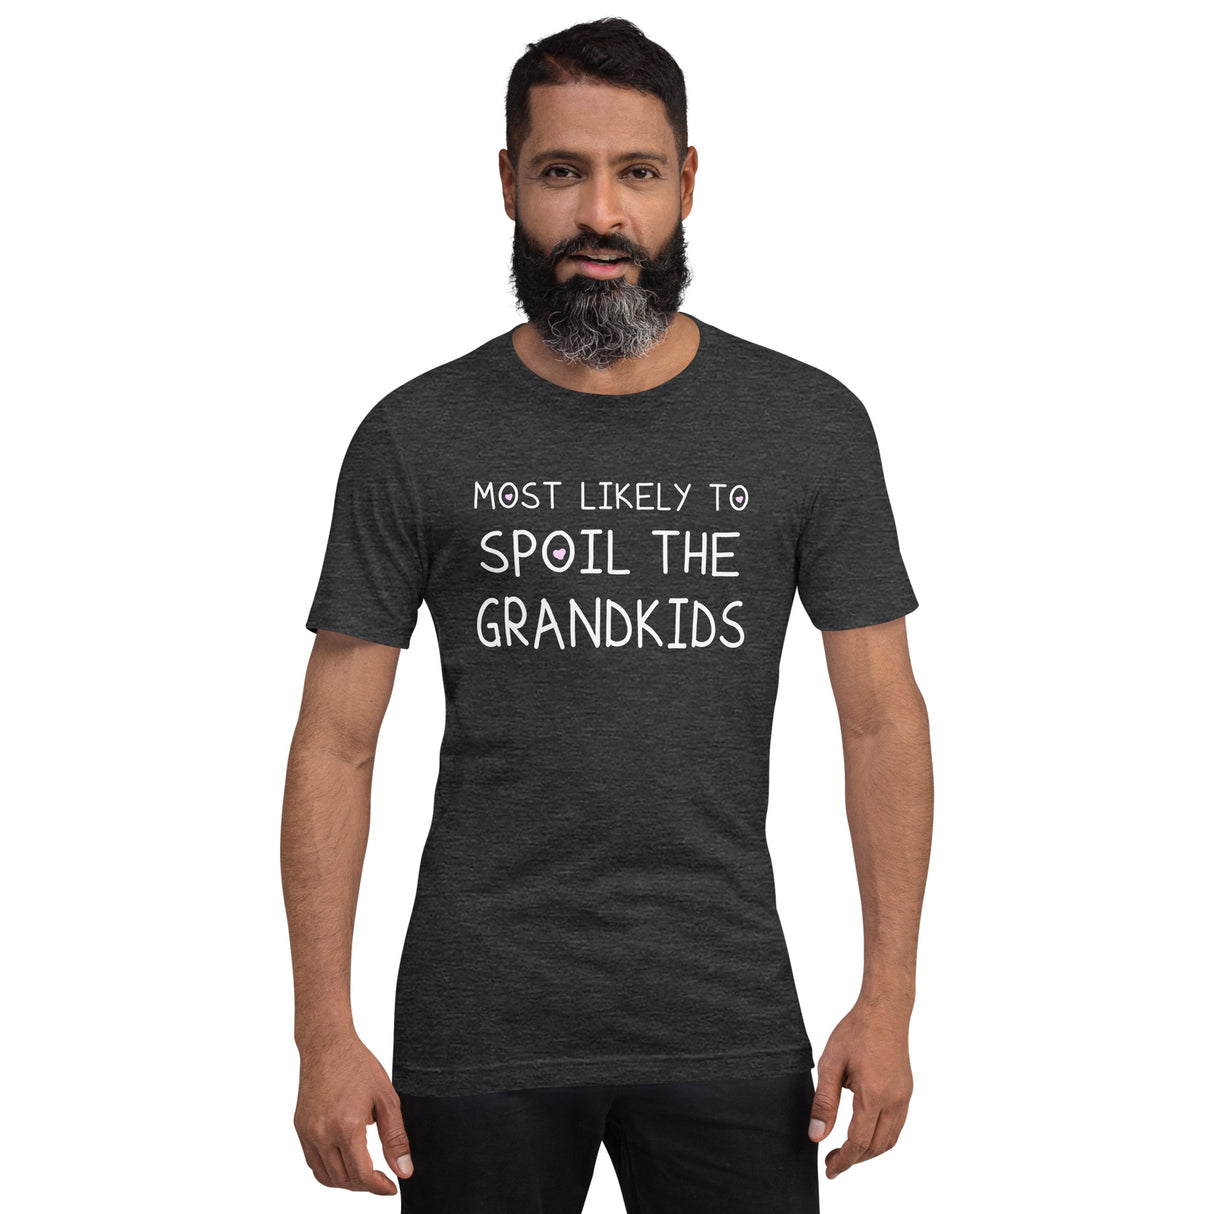 Most Likely To Spoil The Grandkids Men's Shirt